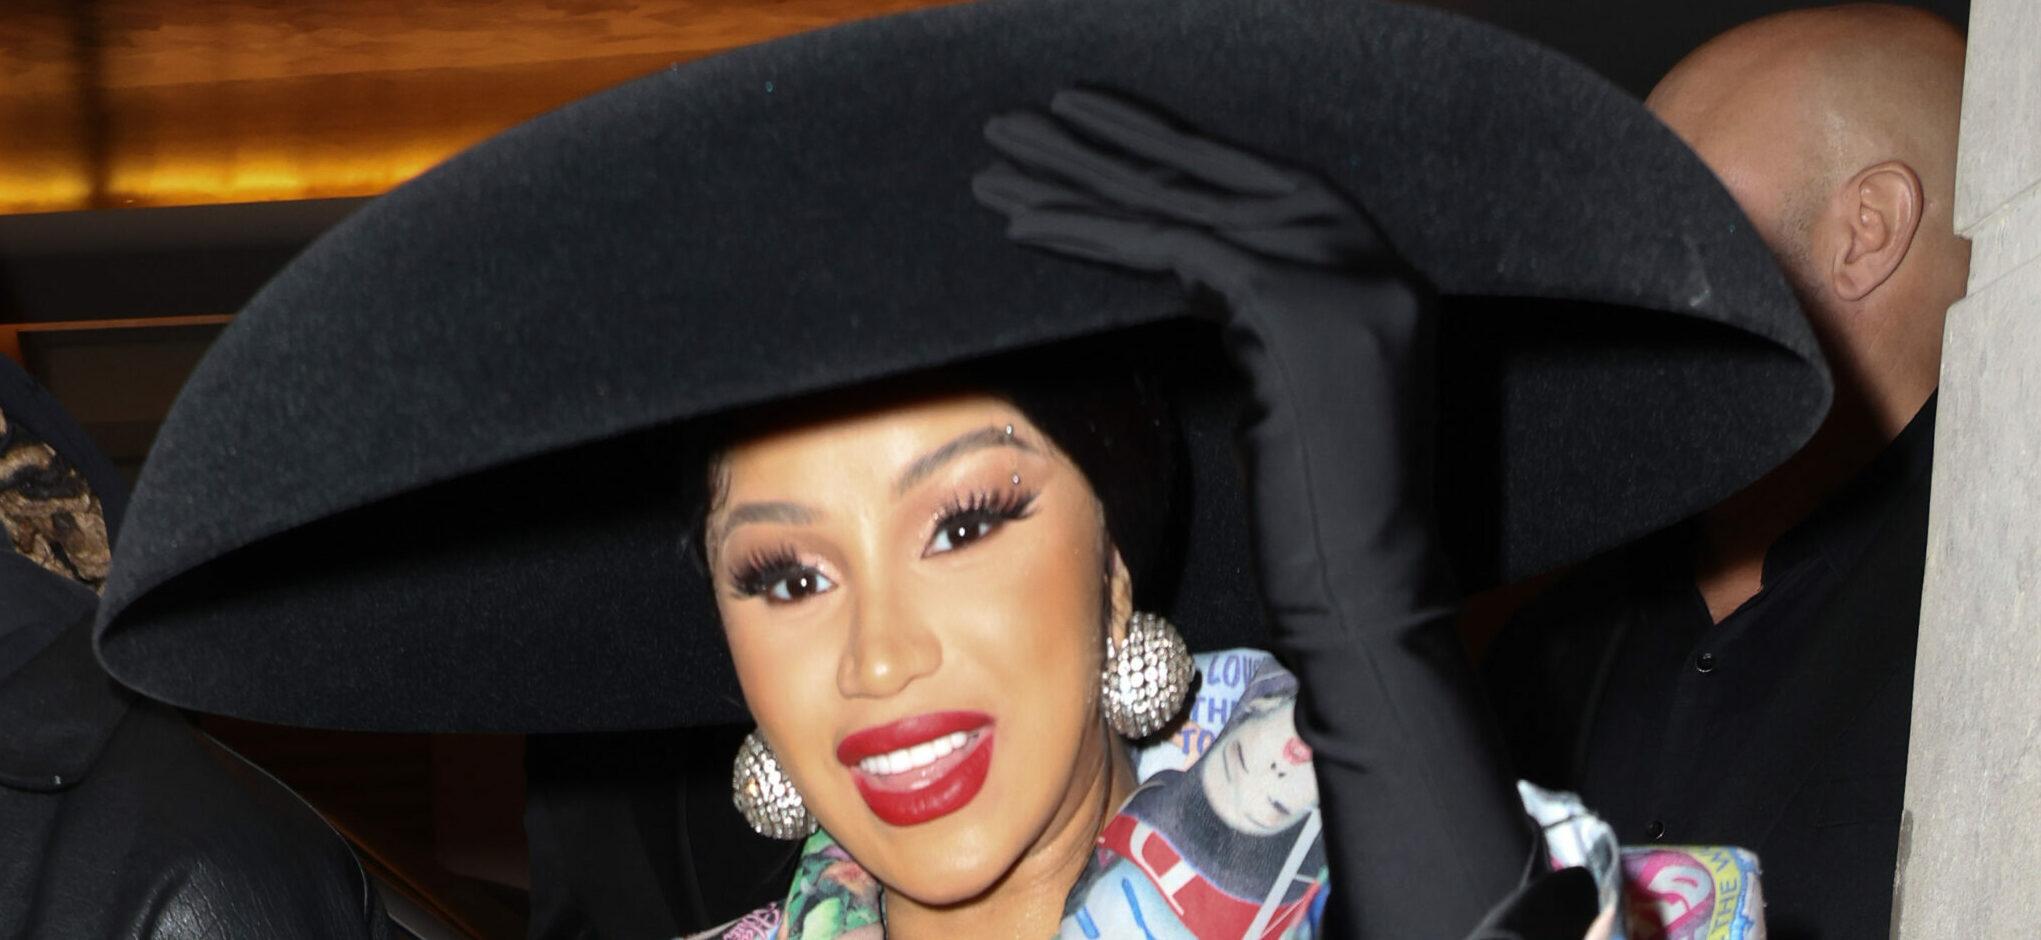 Cardi B Explains Why Republicans, Other Critics Caused Her To Stop Discussing Politics